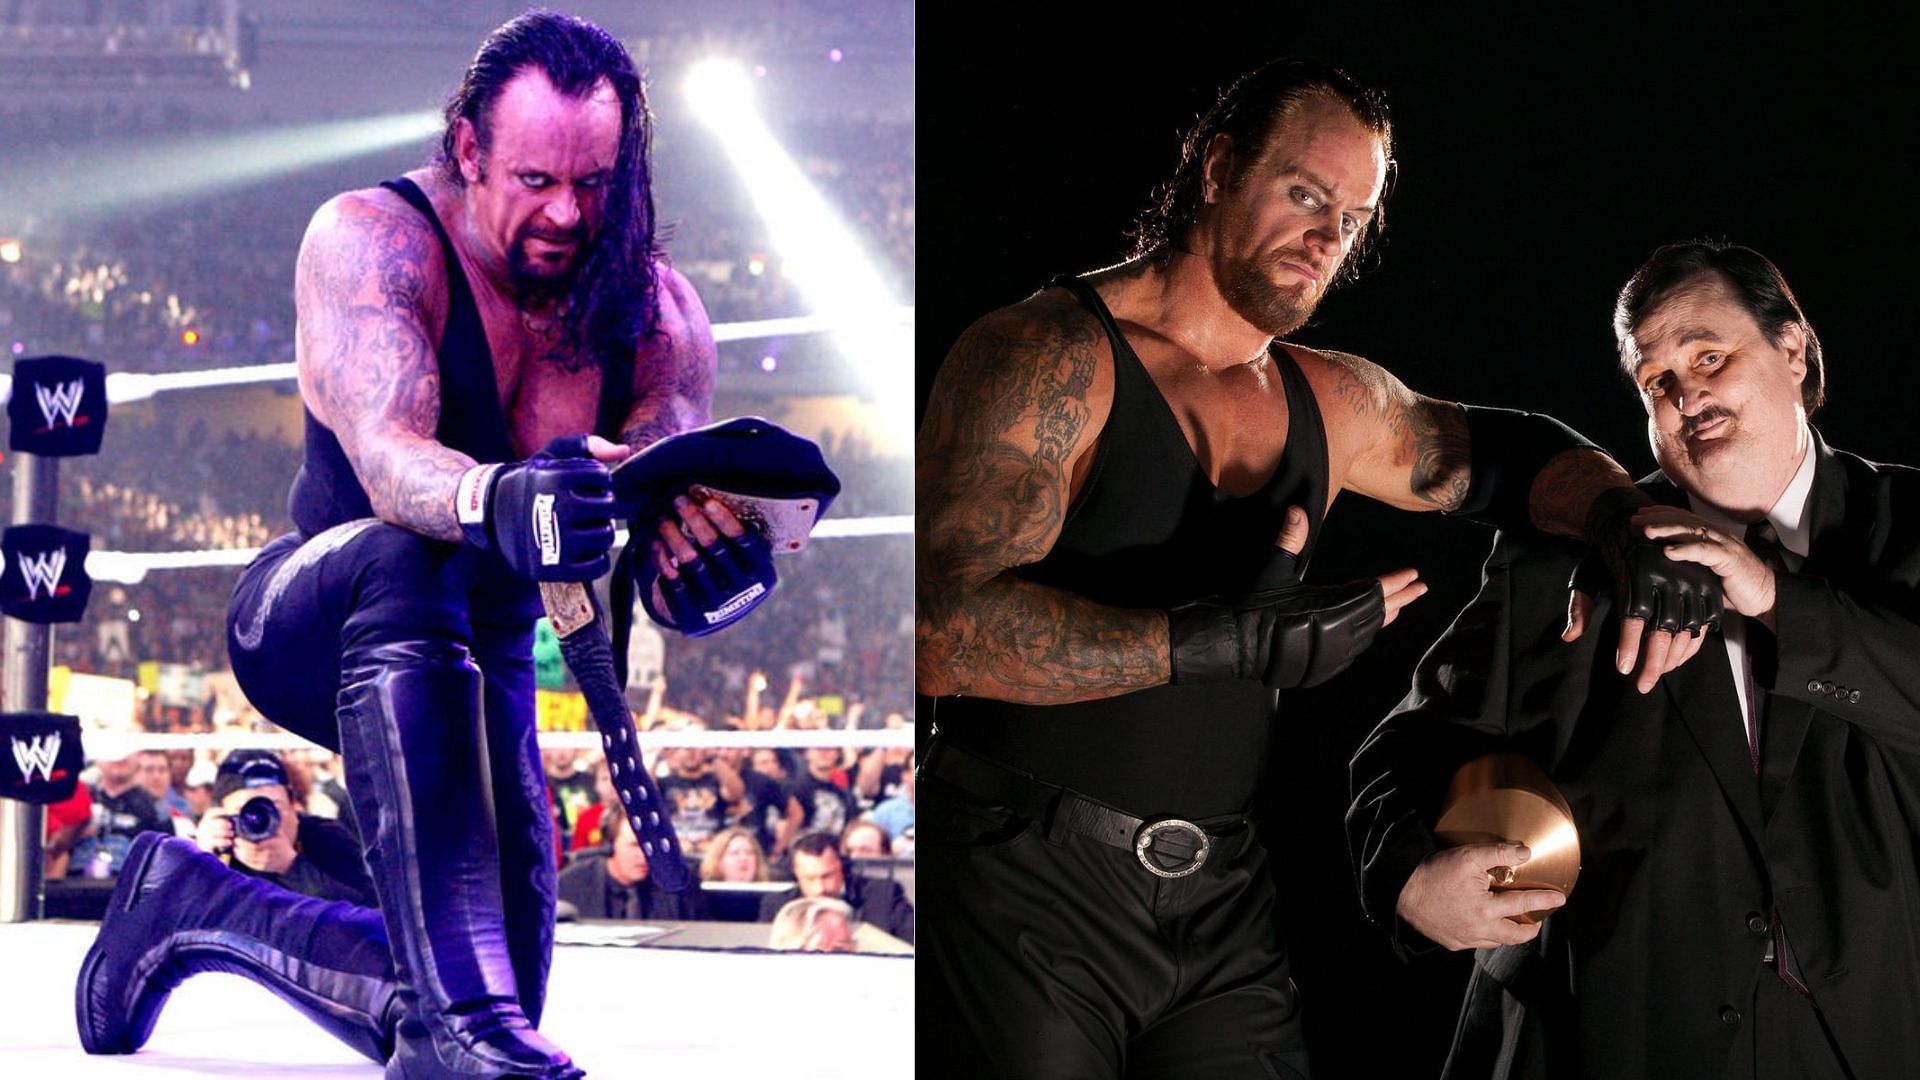 The Undertaker made an emphatic WWE television debut